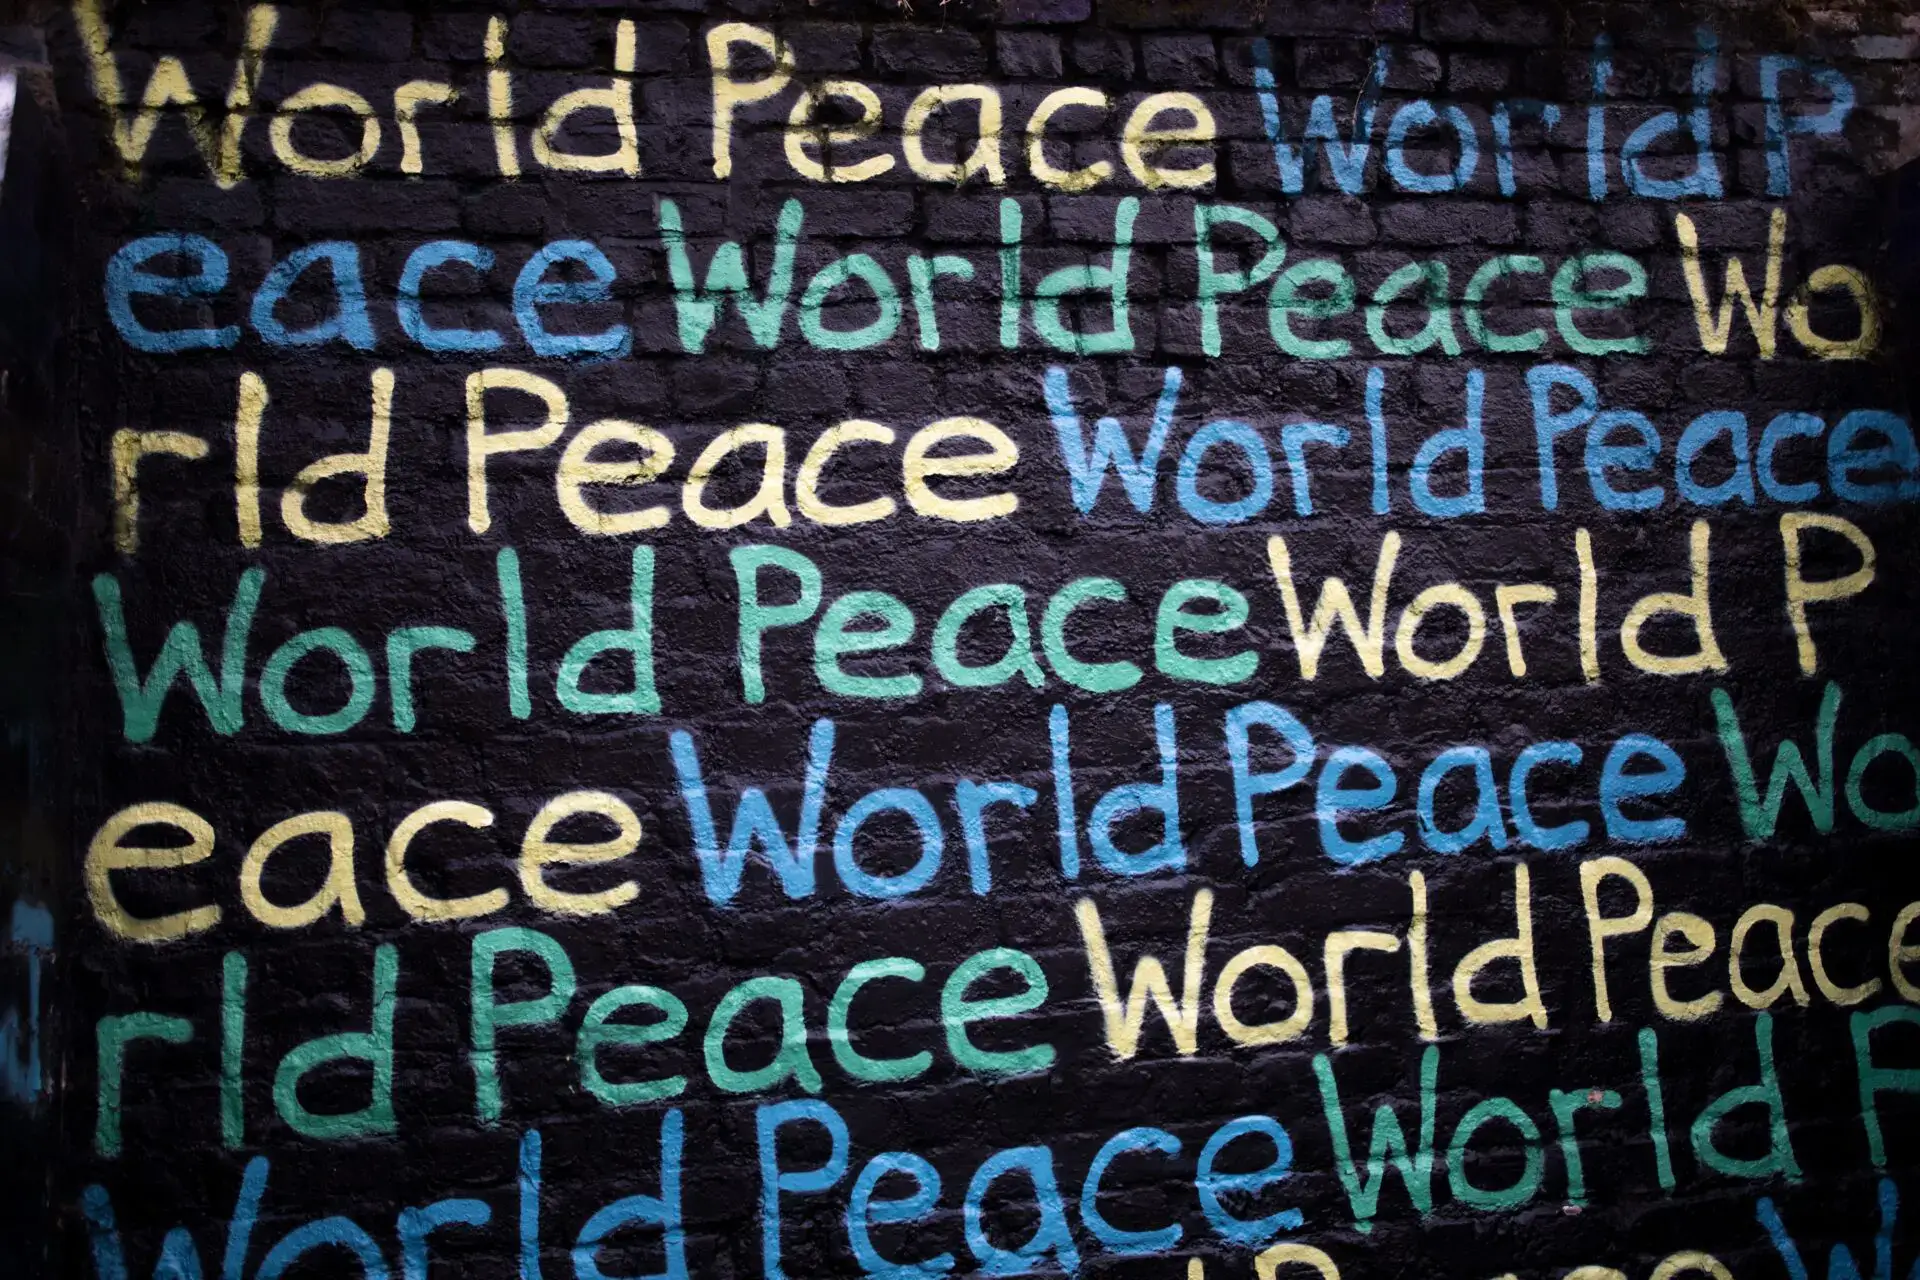 Image of wordings message of peace